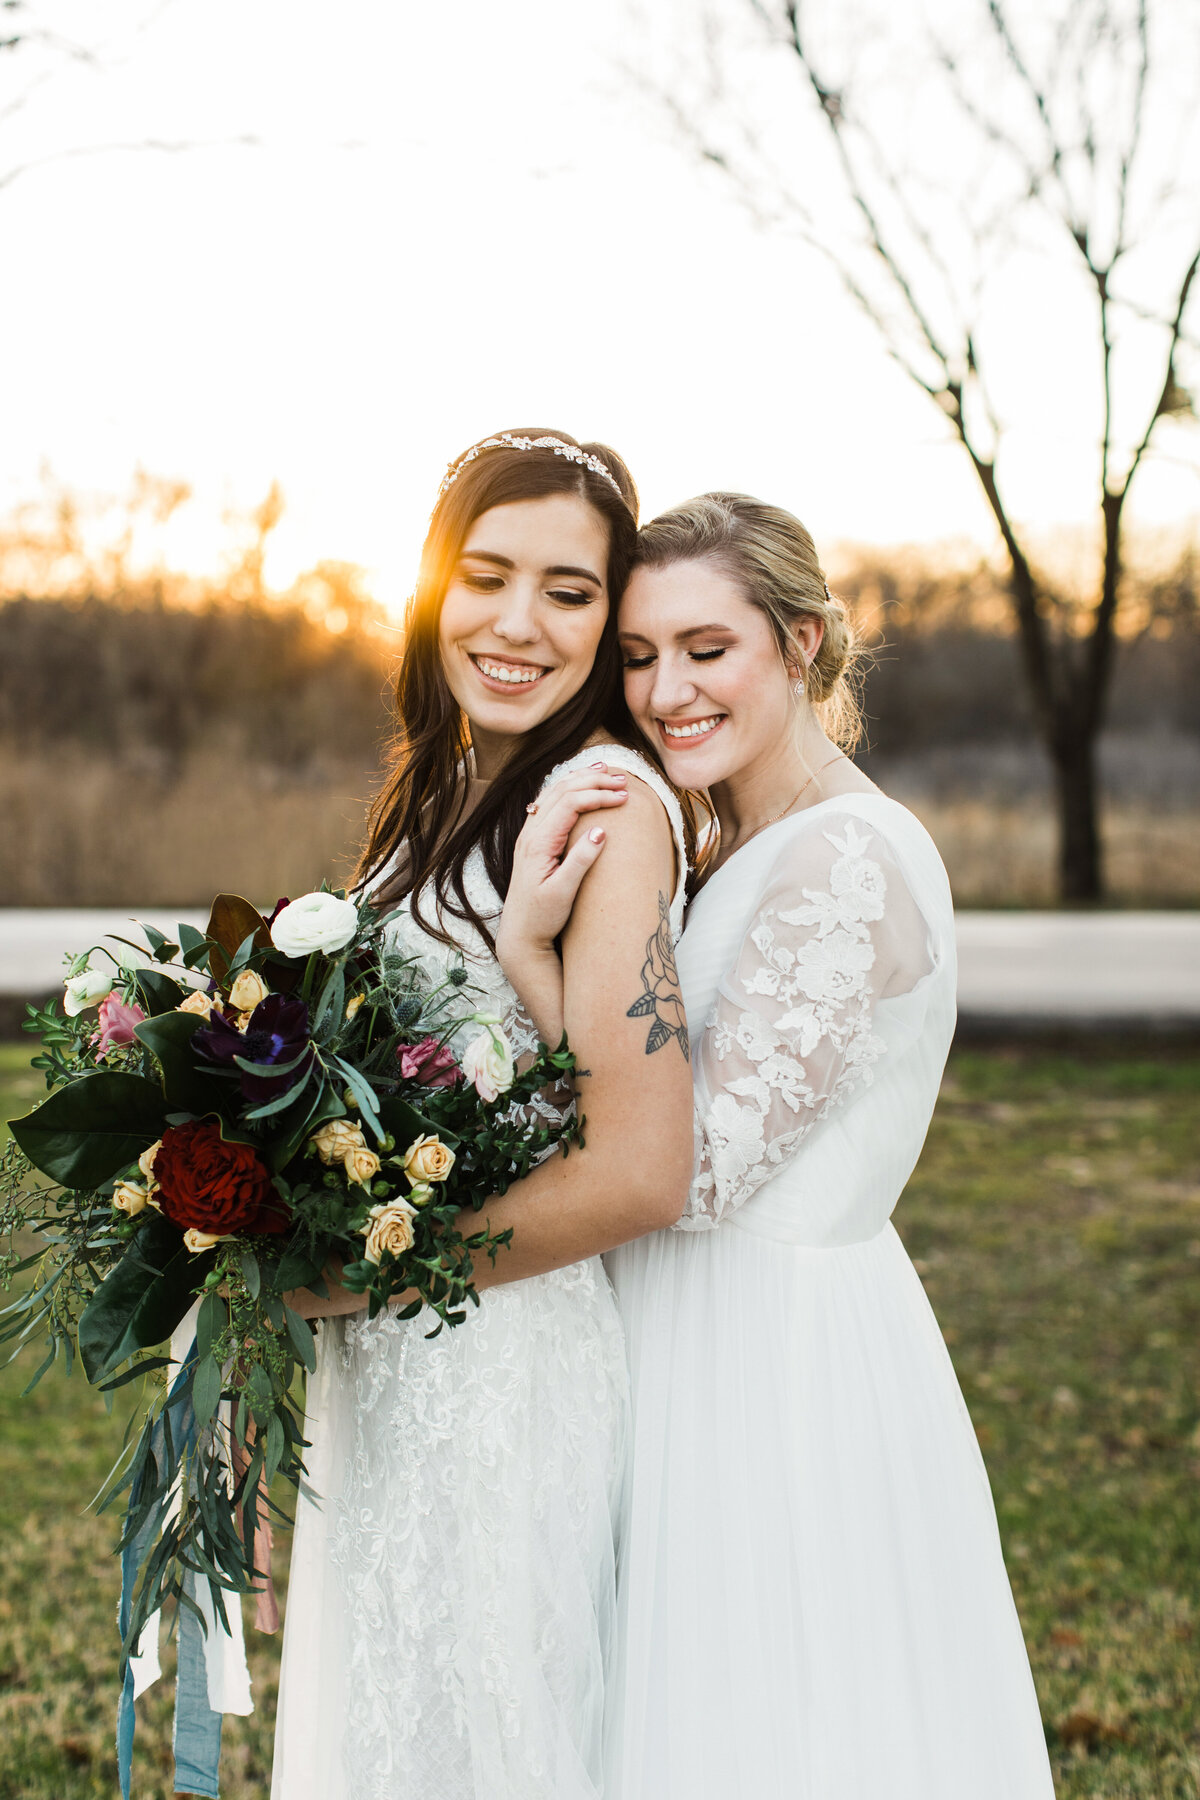 Portrait of two brides holding each other close while being the "big spoon" and "little spoon" on their wedding day in Dallas, Texas. The bride on the left is wearing a sleeveless white dress and detailed headband, is holding a large bouquet, and is the "little spoon." The bride on the right is wearing a long sleeve, detailed wedding dress, and is being the "big spoon."